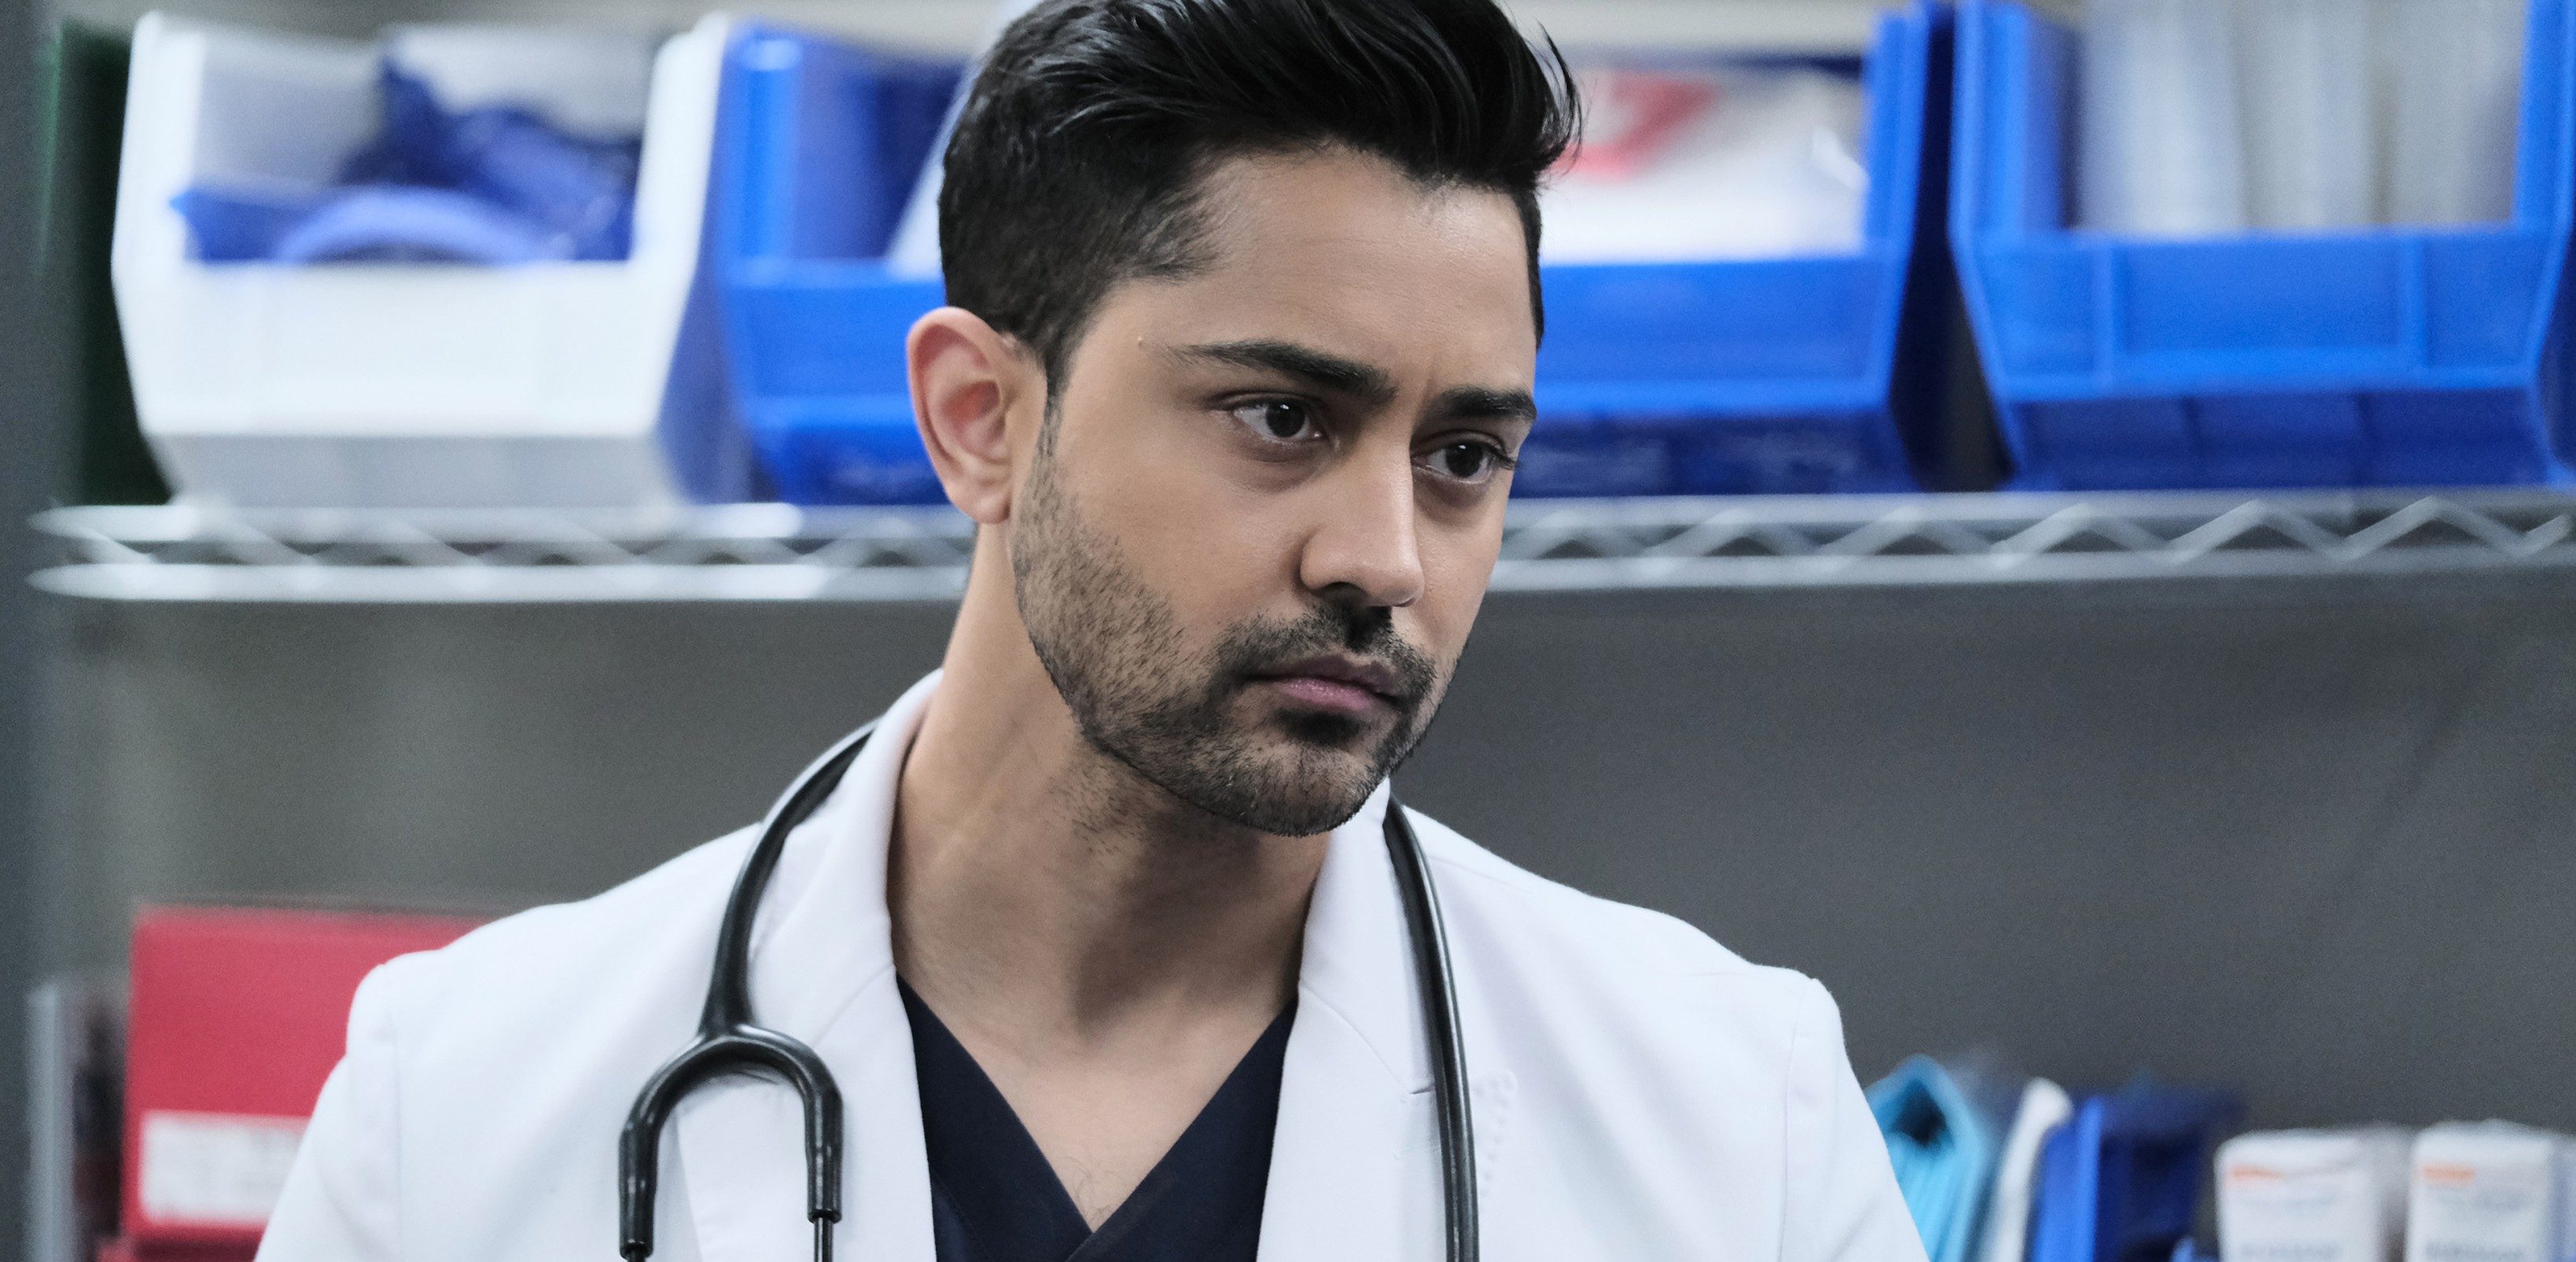 Is Devon Pravesh Leaving Chastain? Is Manish Dayal Leaving The Resident?